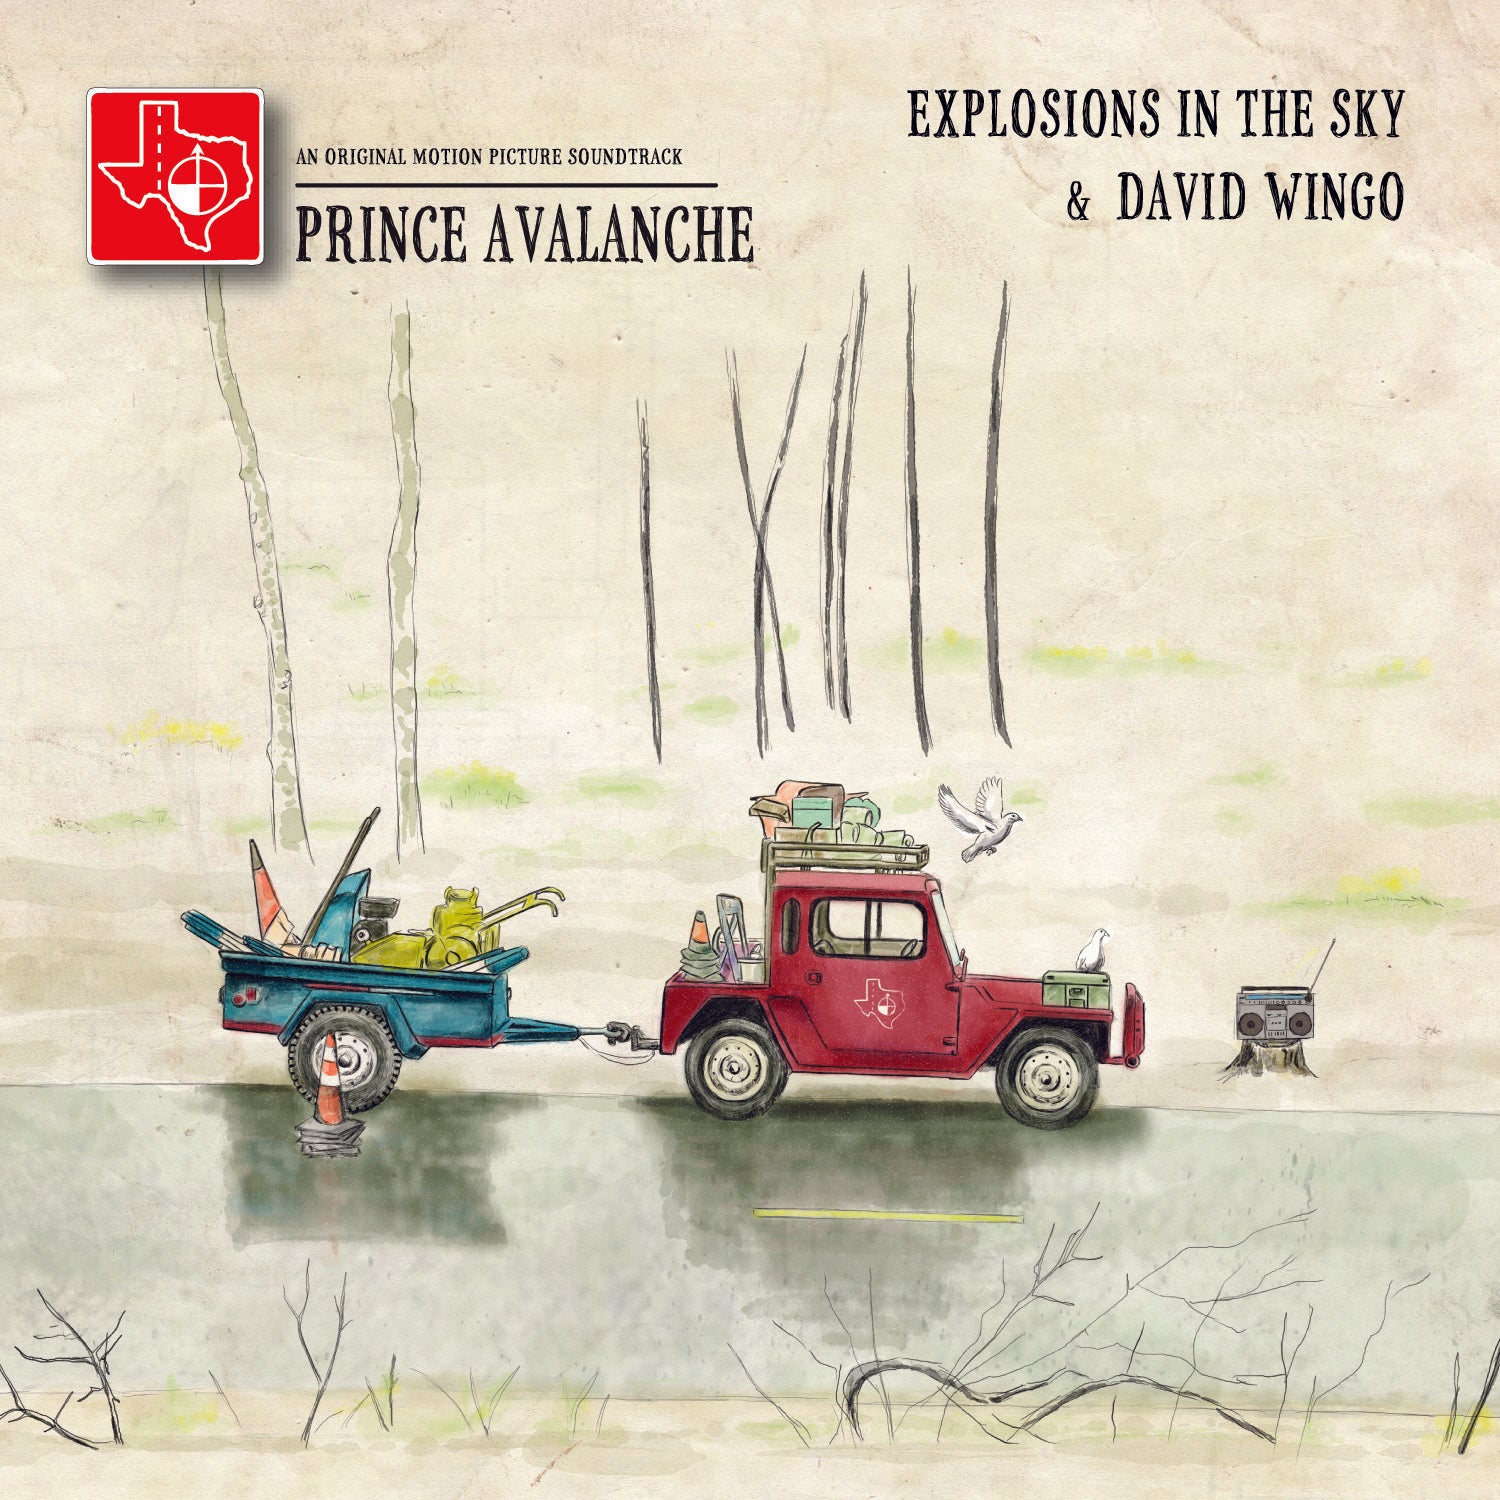 Explosions In The Sky, David Wingo - Prince Avalanche: An Original Motion Picture Soundtrack